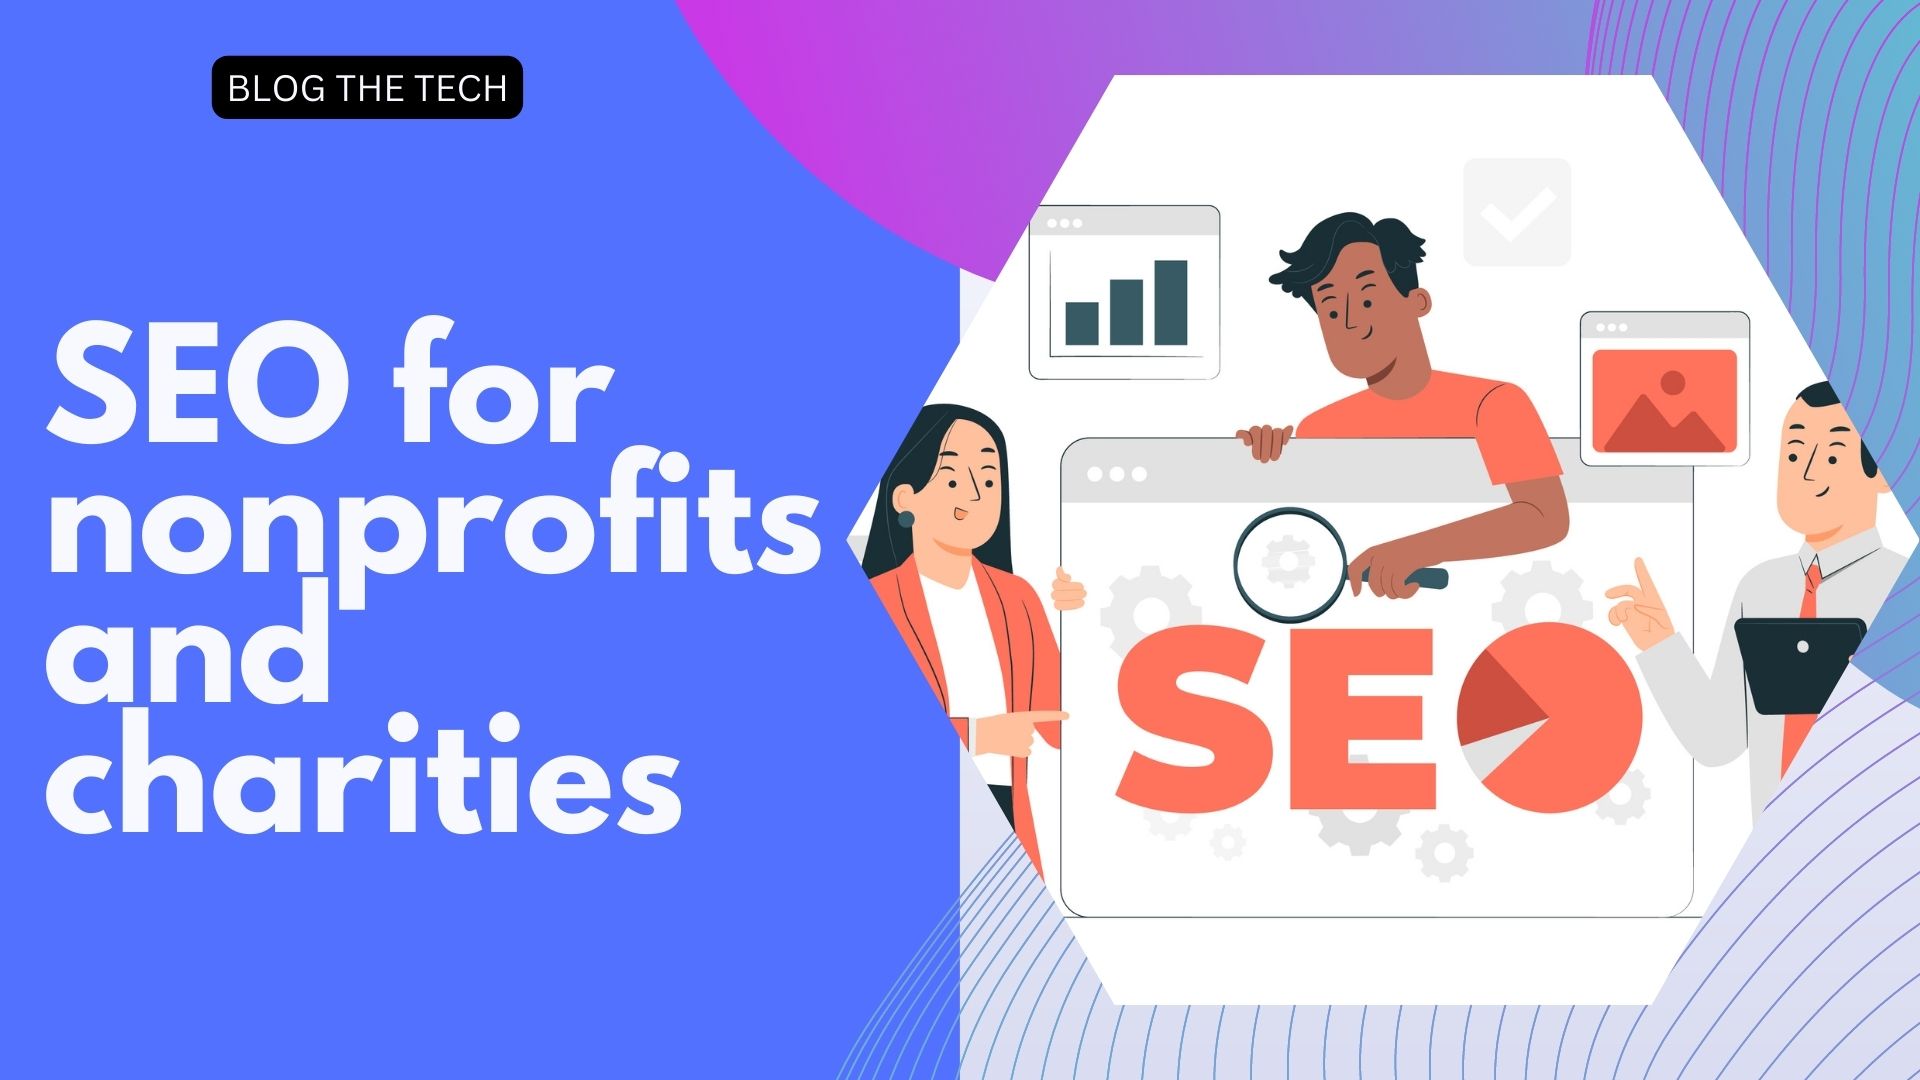 SEO for nonprofits and charities